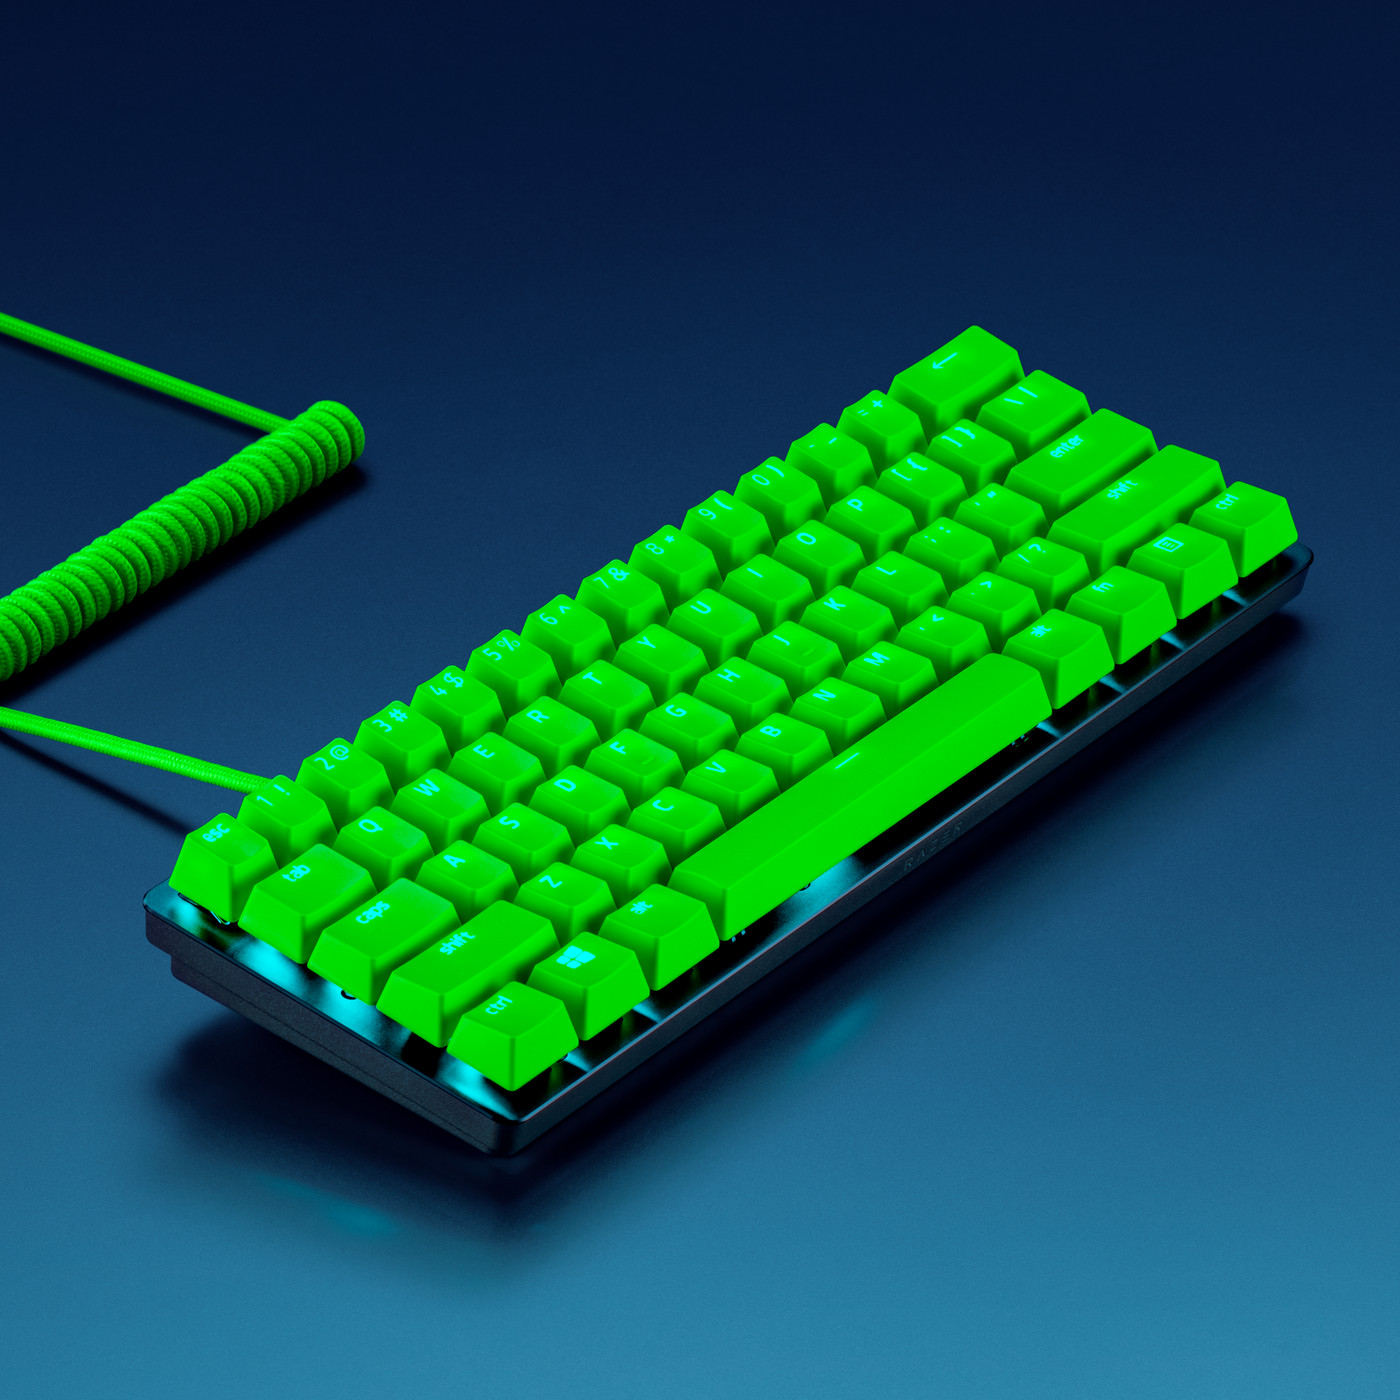 Green Coiled Cable Upgrade Set: Durable Doubleshot PBT Tactically Coiled & Designed Keycap Removal Tool & Stabilizers Razer PBT Keycap Universal Compatibility Braided Fiber Cable 